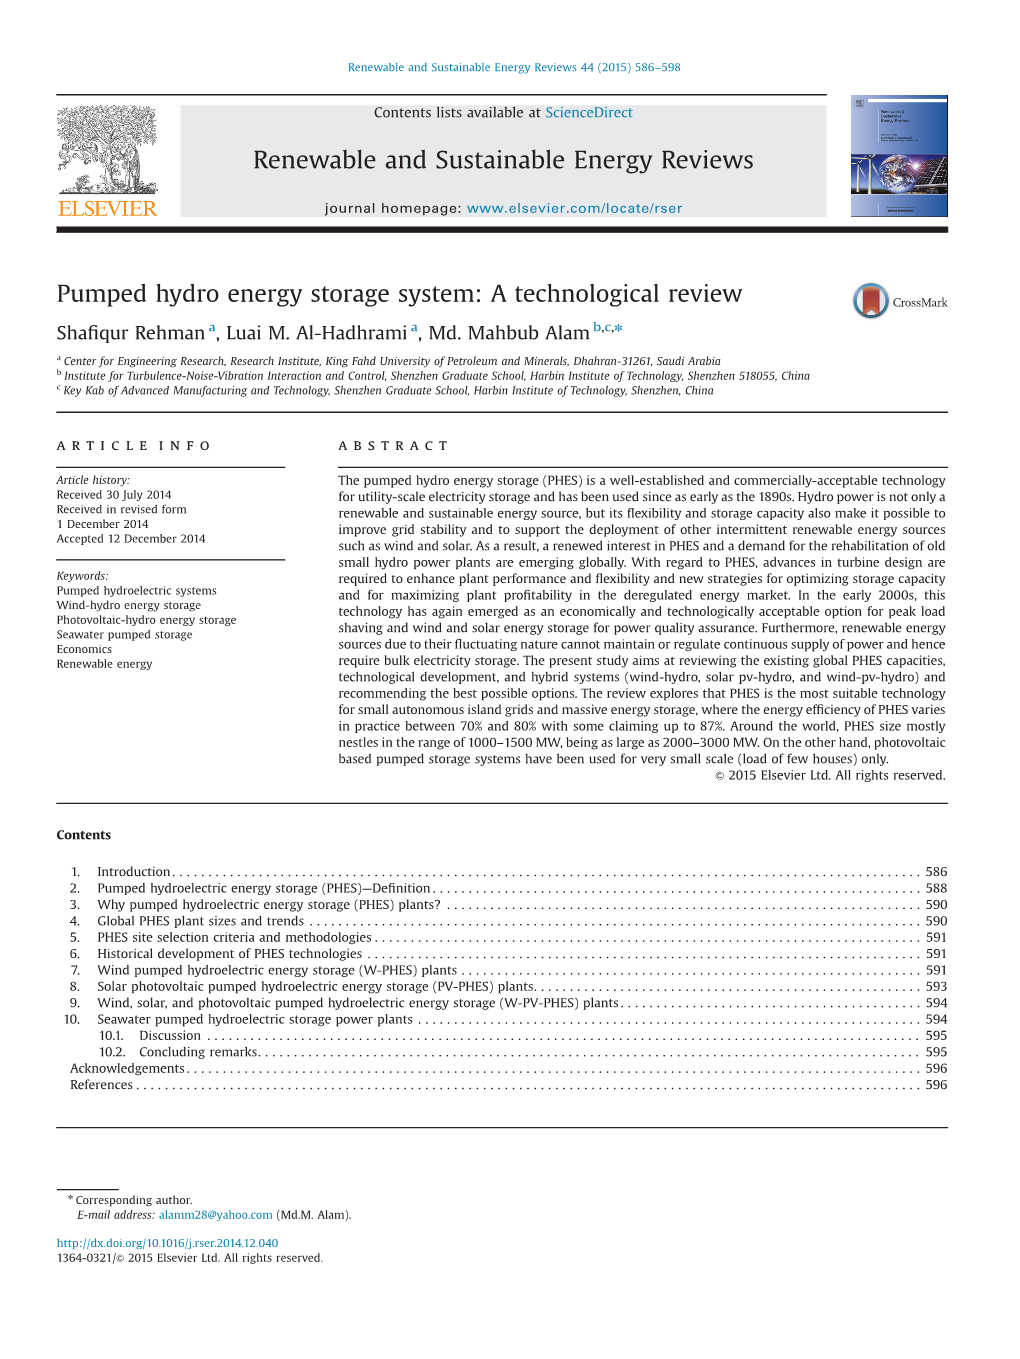 Pumped Hydro Energy Storage System a Technological Review